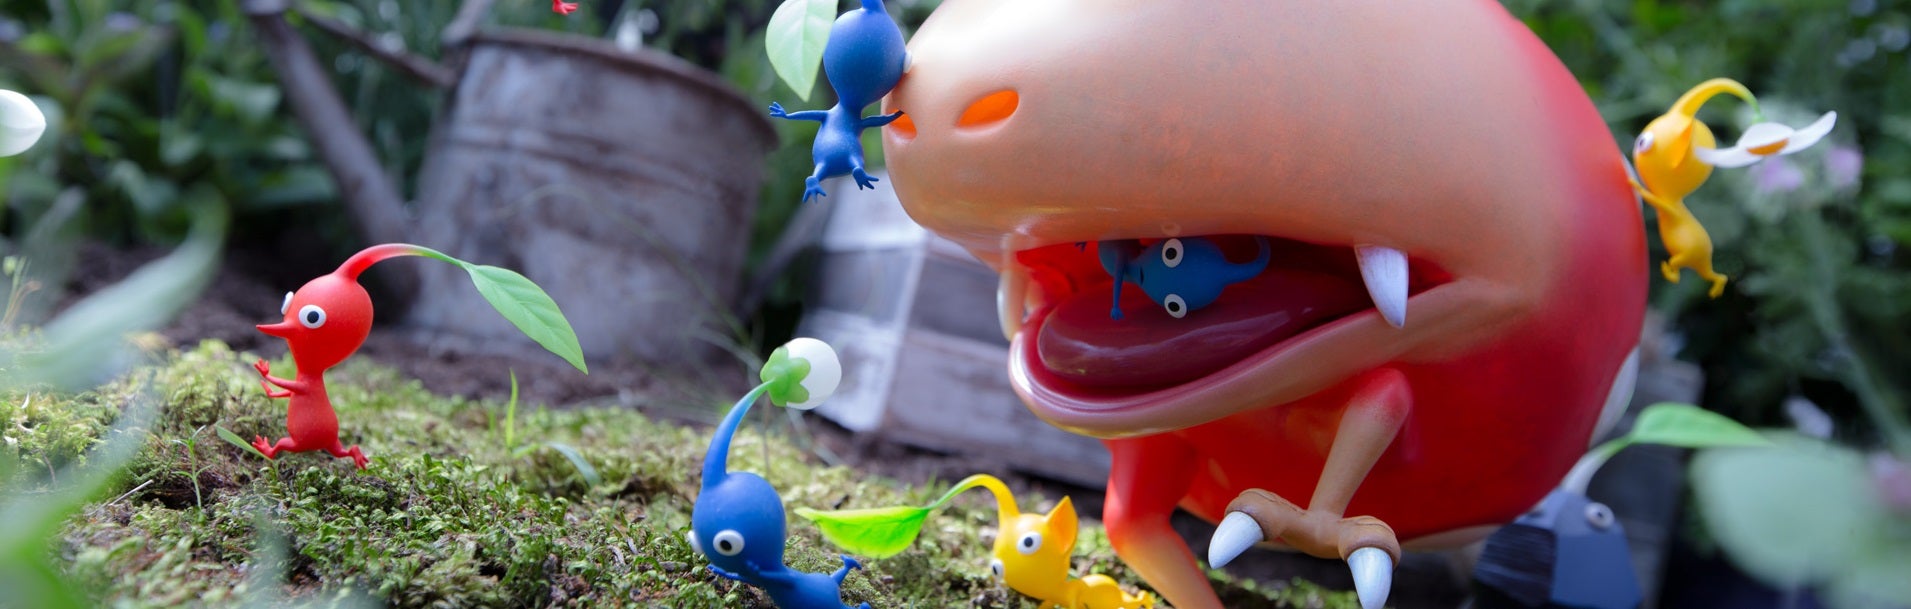 Image for Pikmin 3 is the Greatest War Game I've Ever Played